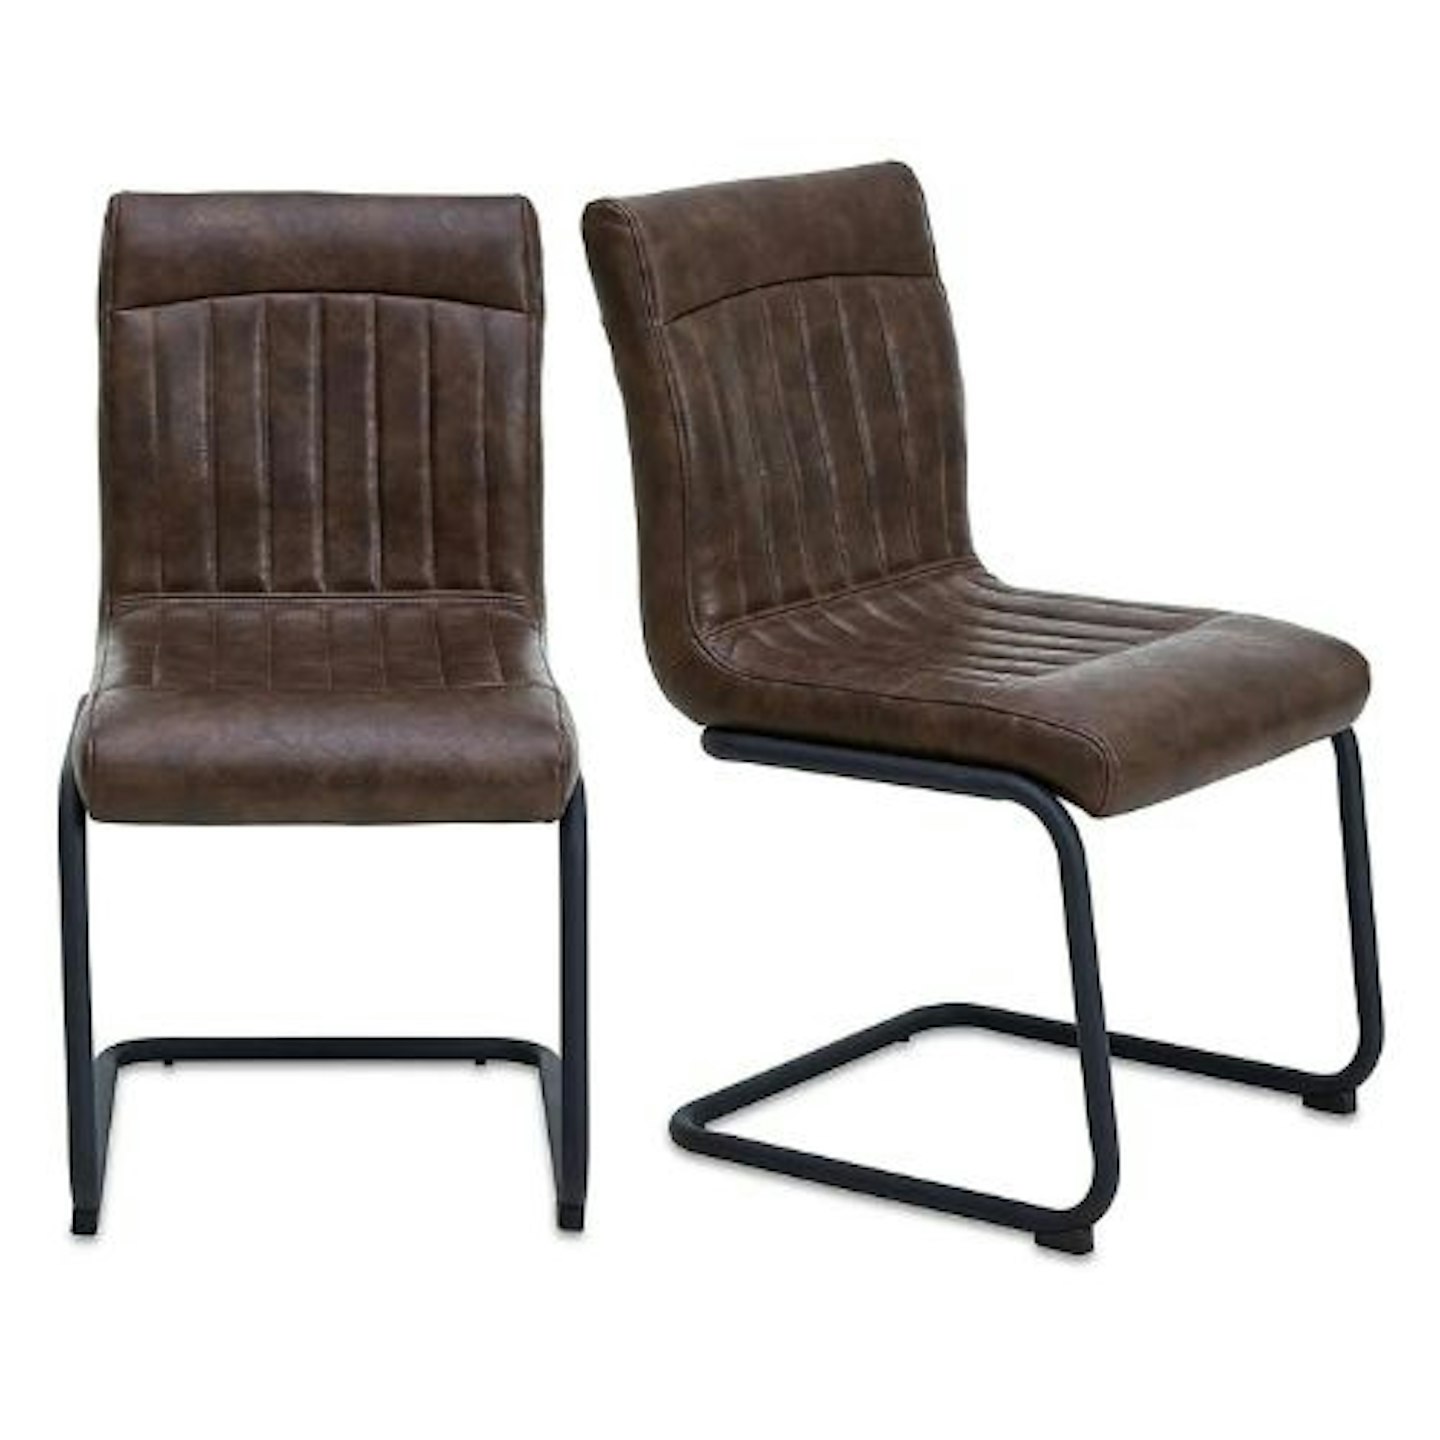 Felix Cantilever Faux Leather Dining Chairs - Set of 2